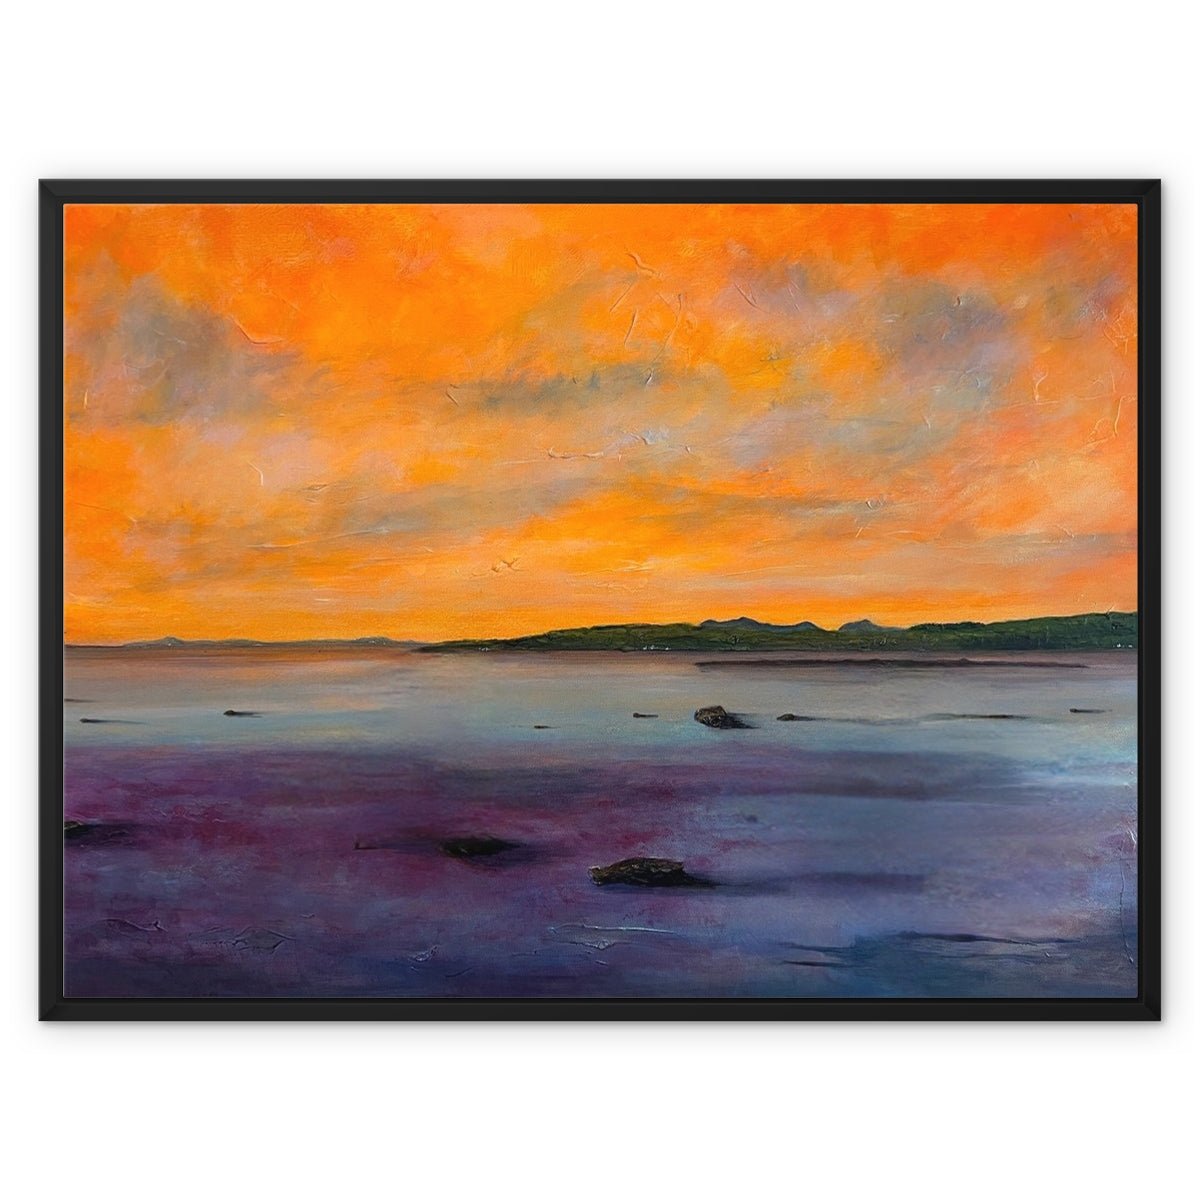 Looking From Largs Painting | Framed Canvas From Scotland-Floating Framed Canvas Prints-River Clyde Art Gallery-32"x24"-Black Frame-Paintings, Prints, Homeware, Art Gifts From Scotland By Scottish Artist Kevin Hunter